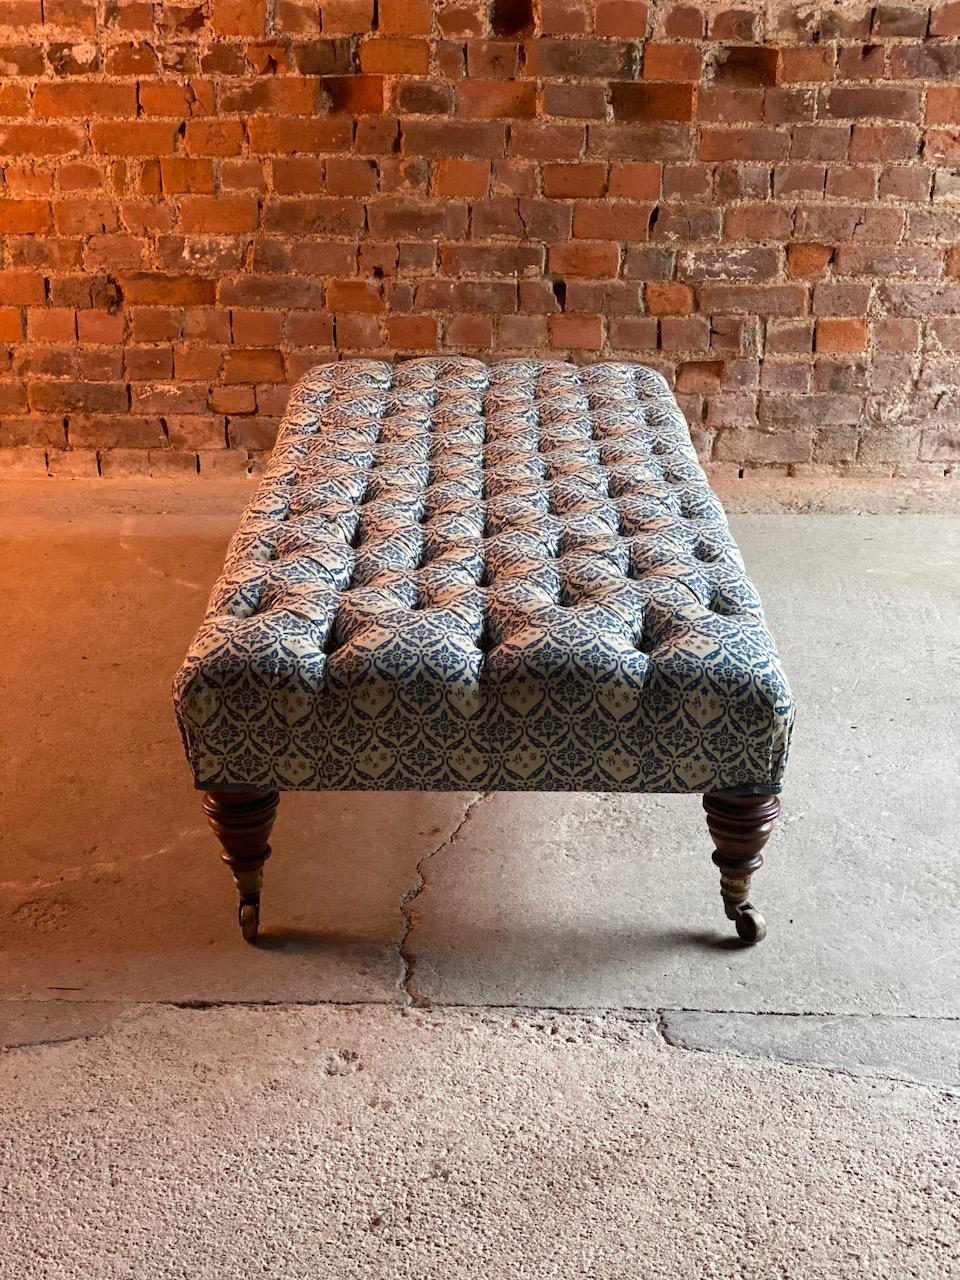 Howard and Sons large footstool, circa 1935

A highly desirable oversized Howard and Sons button back footstool circa 1935, newly upholstered in the inimitable Howard and Son’s ticking fabric which has the Gothic H&S monogram logo as part of the